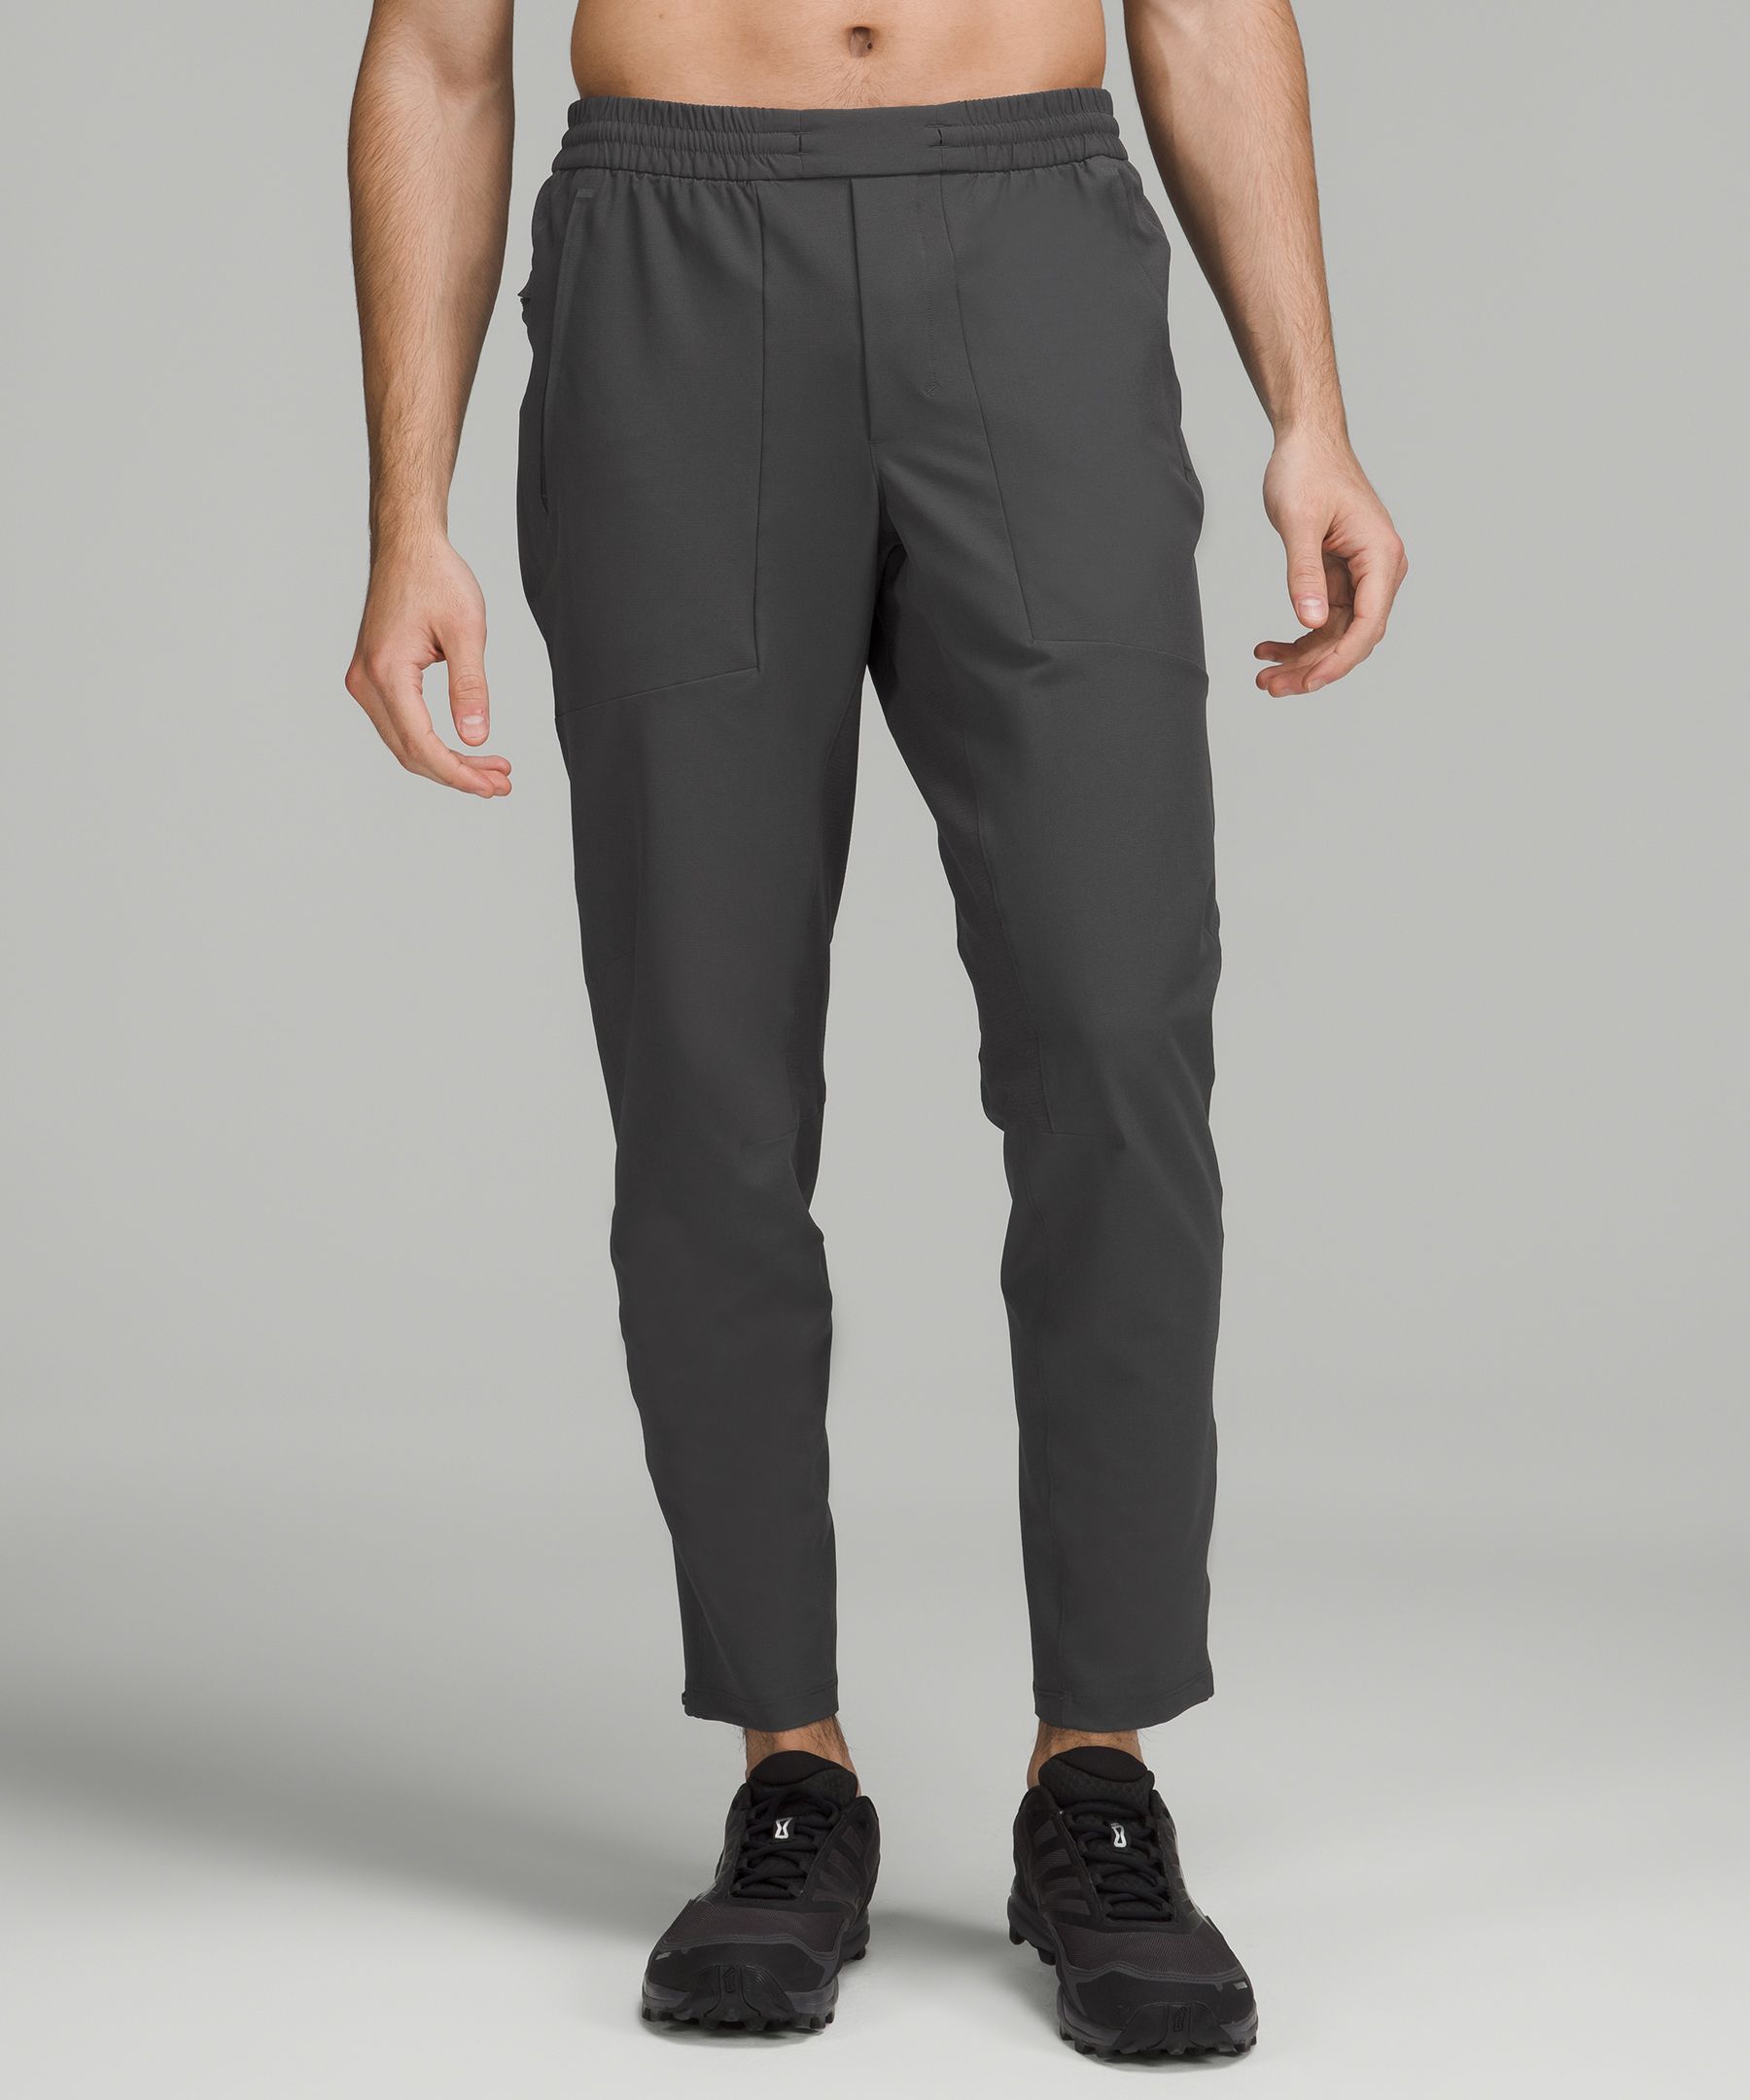 Lululemon License To Train Pants Tall In Graphite Grey | ModeSens